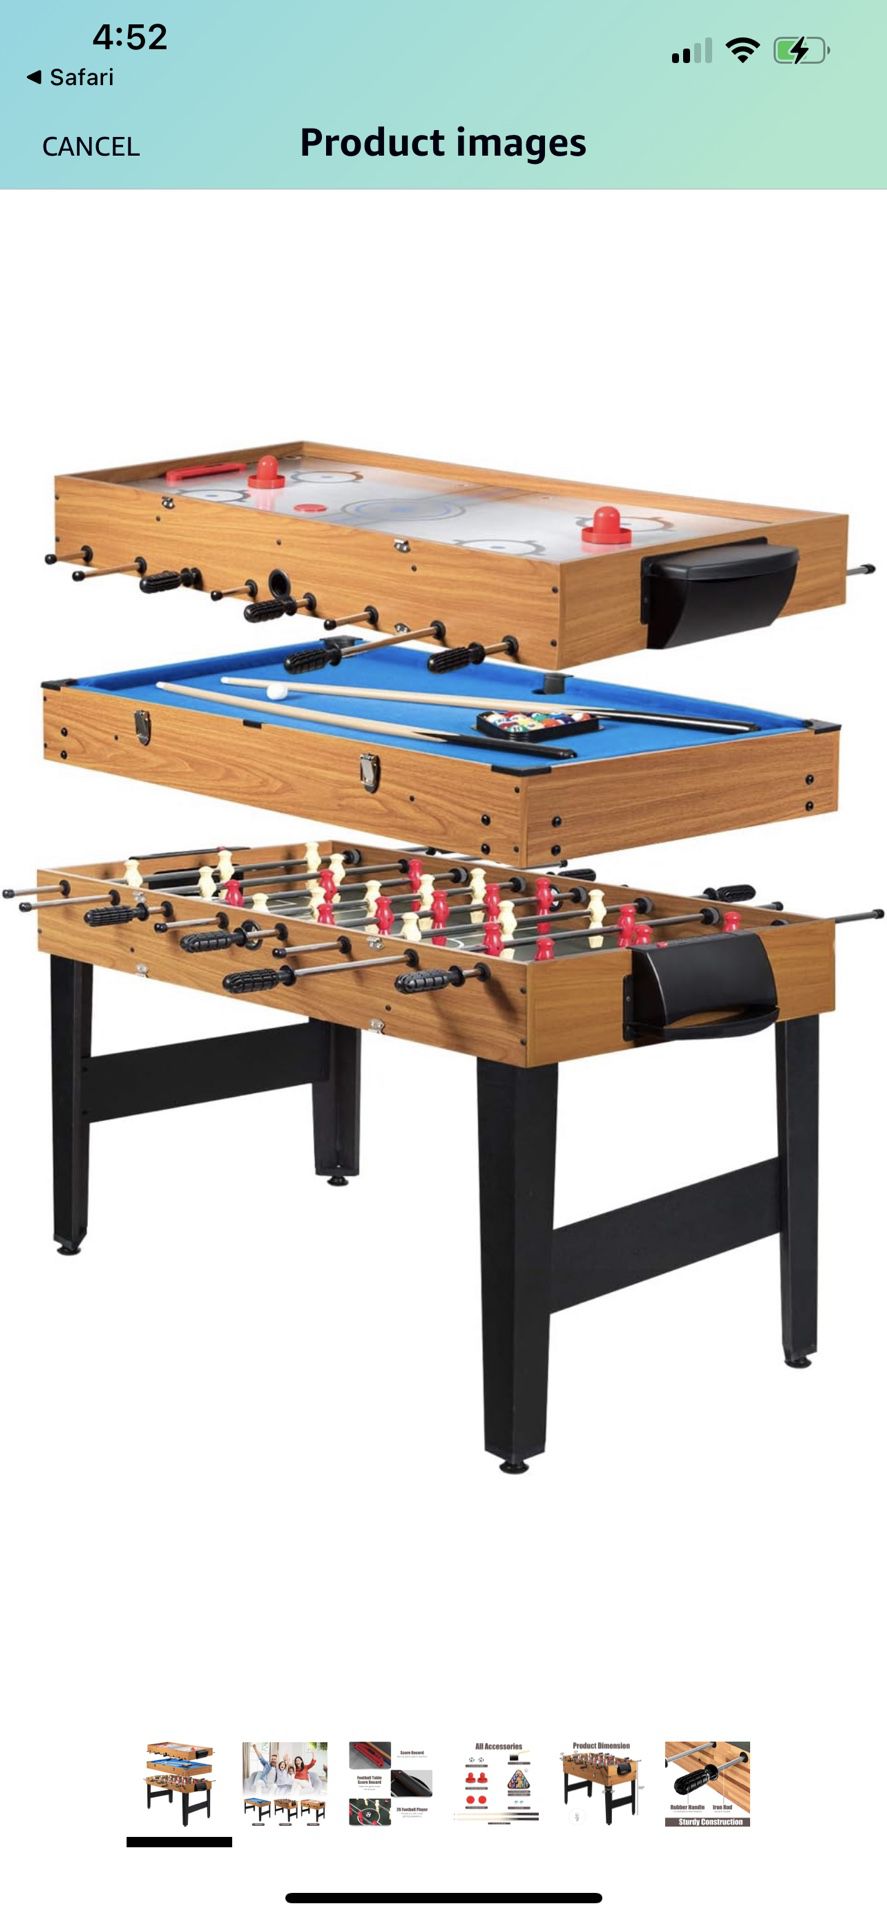 3 In 1 Multi Game Table